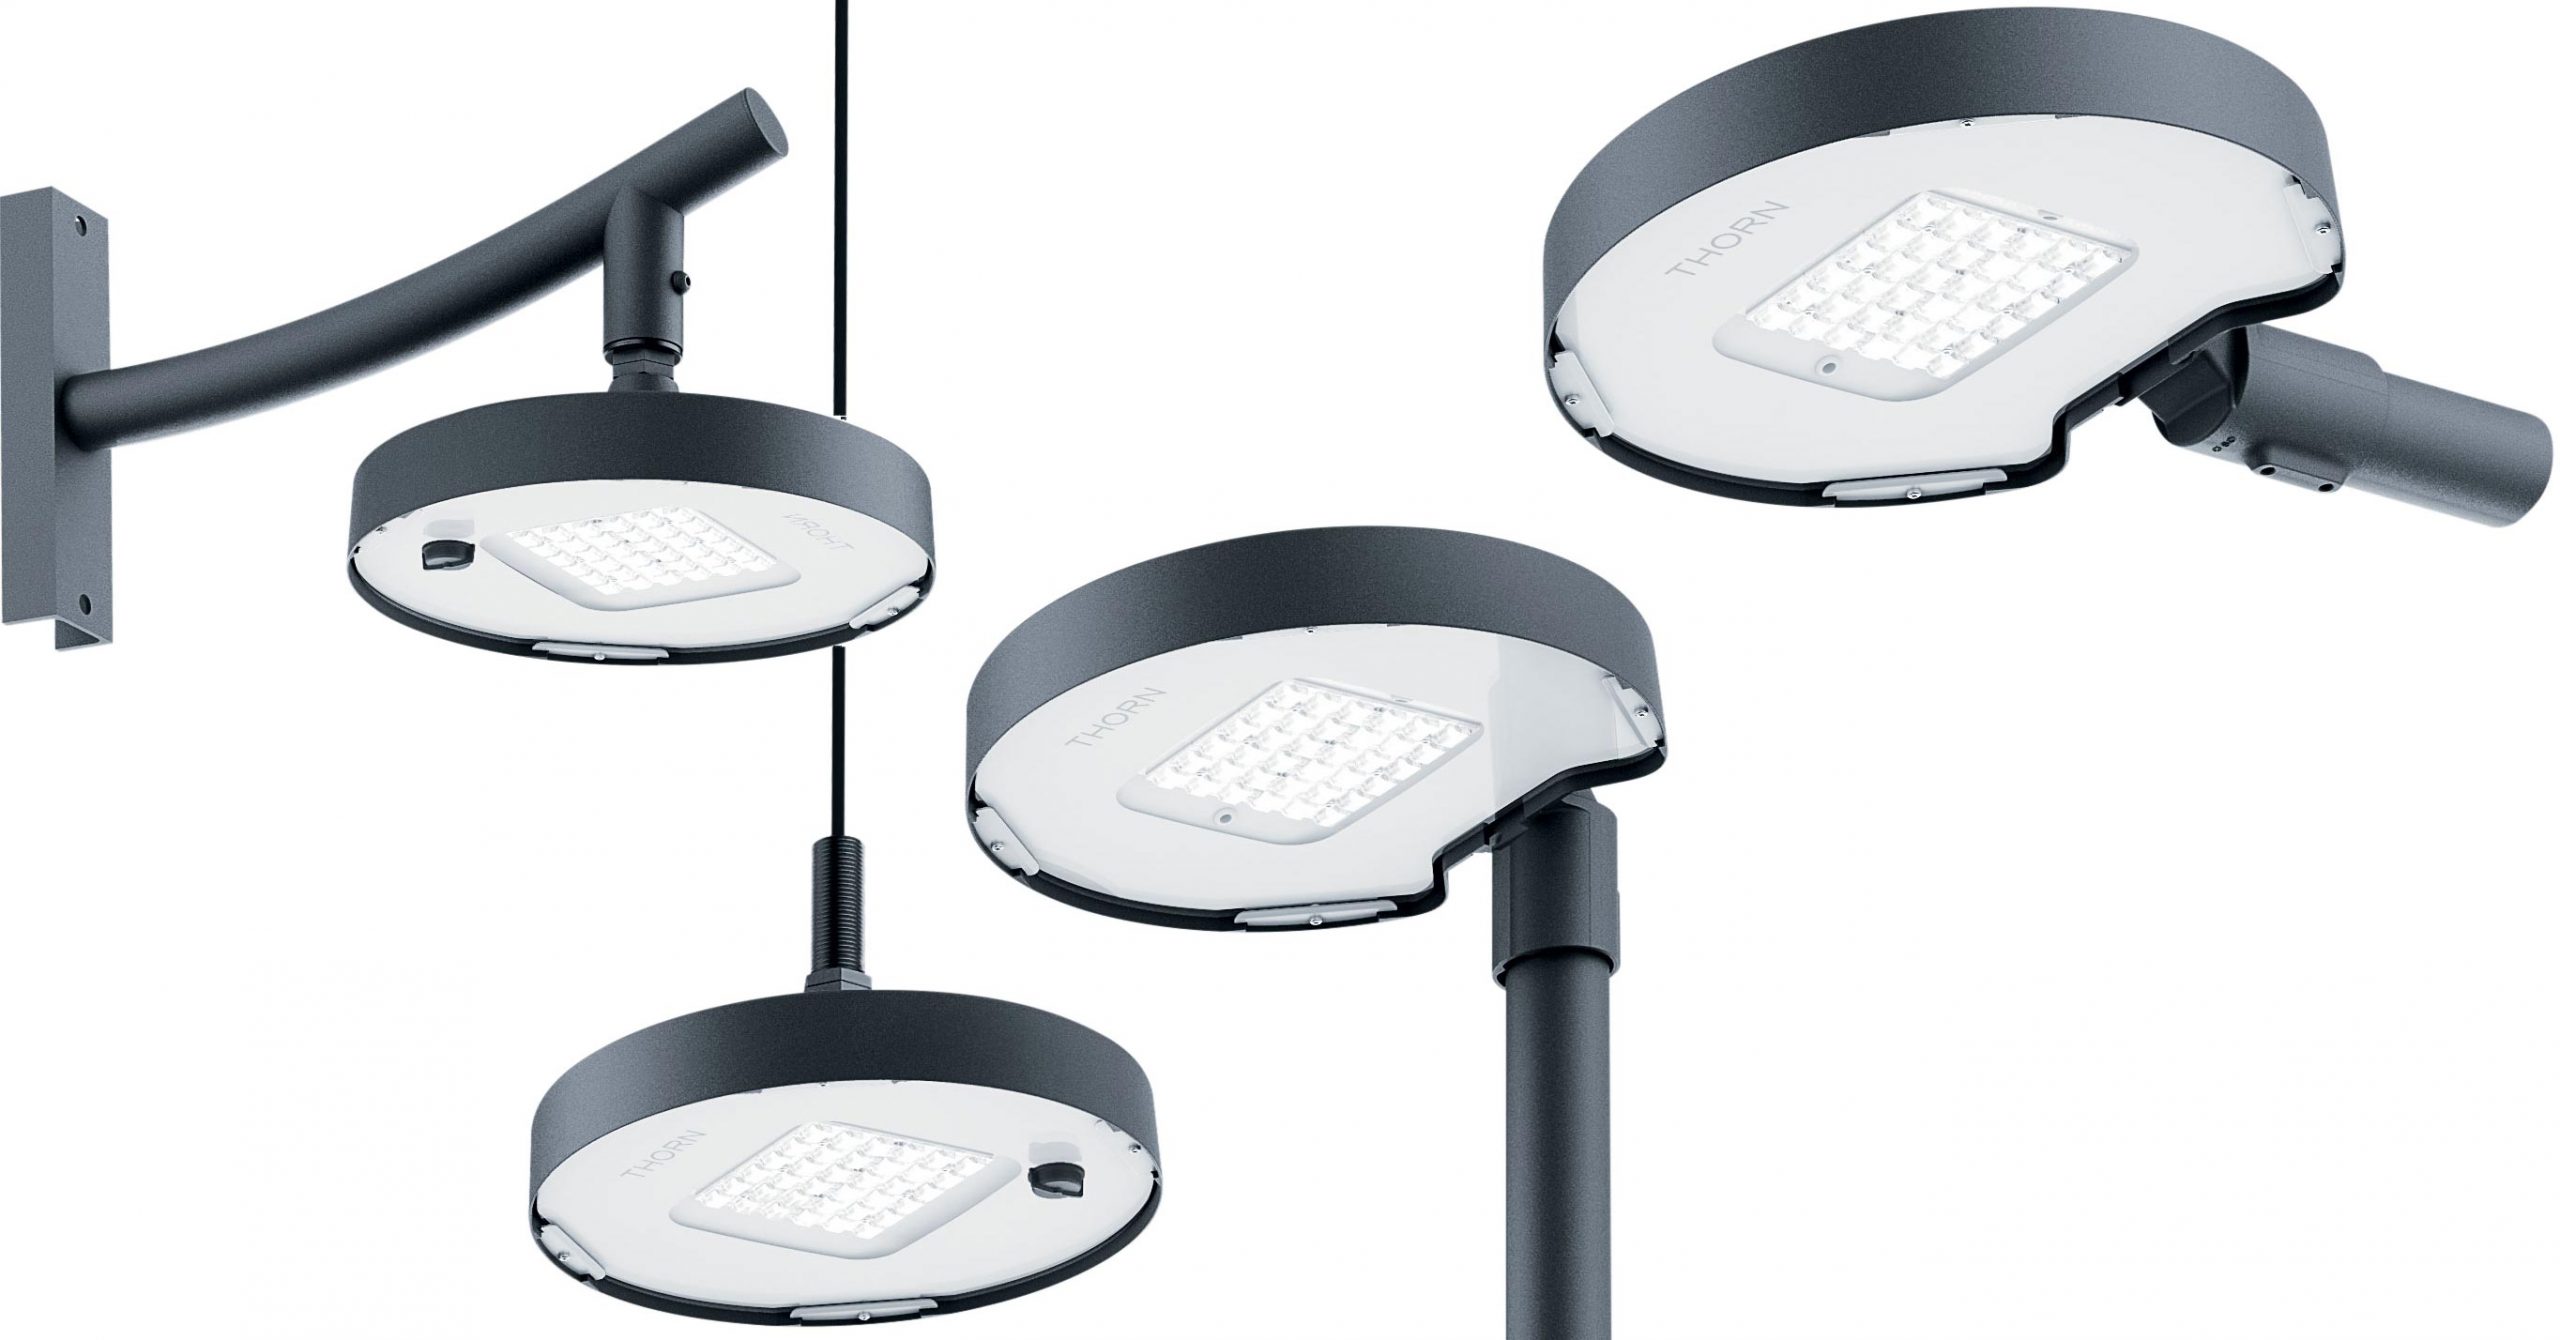 New Thorn urban lighting with variable light distribution technology